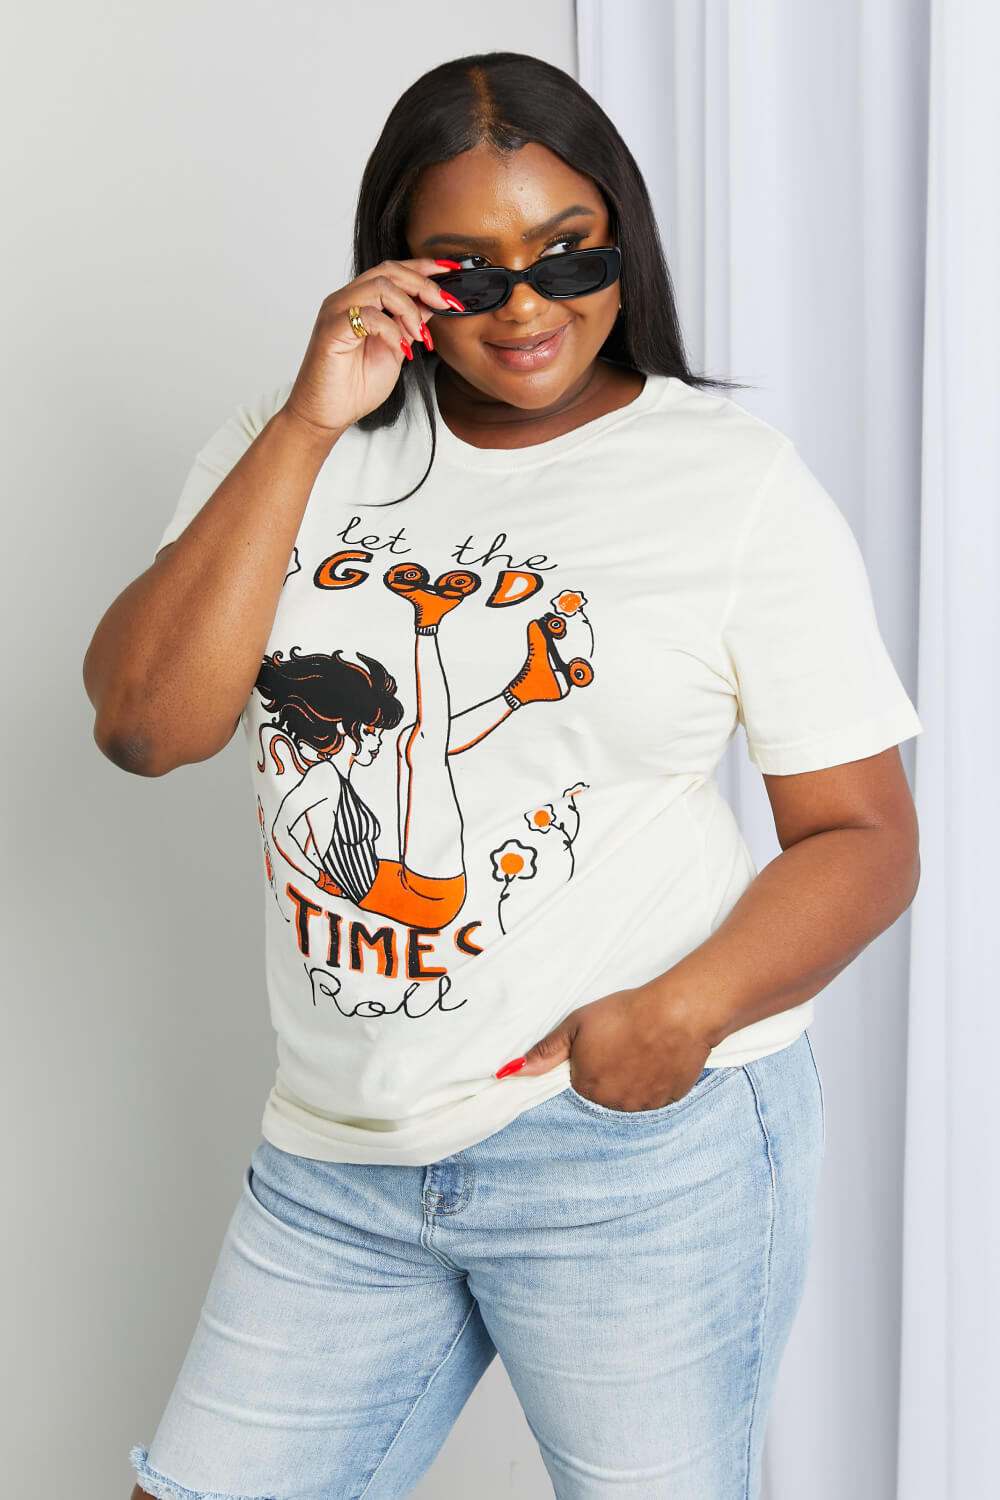 mineB Full Size LET THE GOOD TIMES ROLL Graphic Tee | Tees - CHANELIA